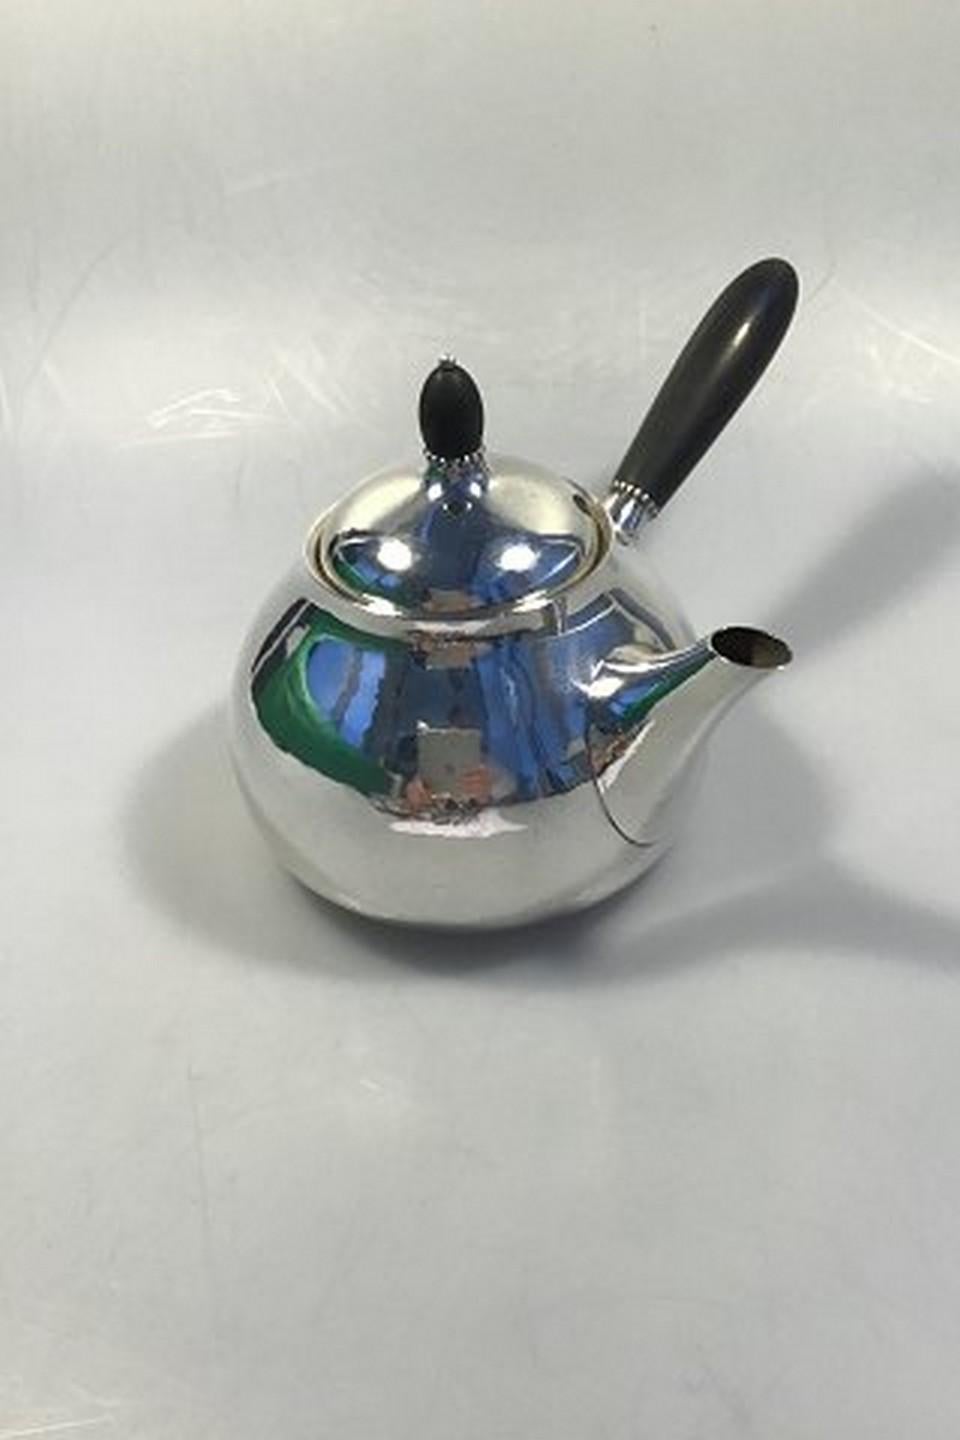 Georg Jensen sterling silver tea pot No 80B with ebony handle
Measures: Height 14.0 cm/5.51